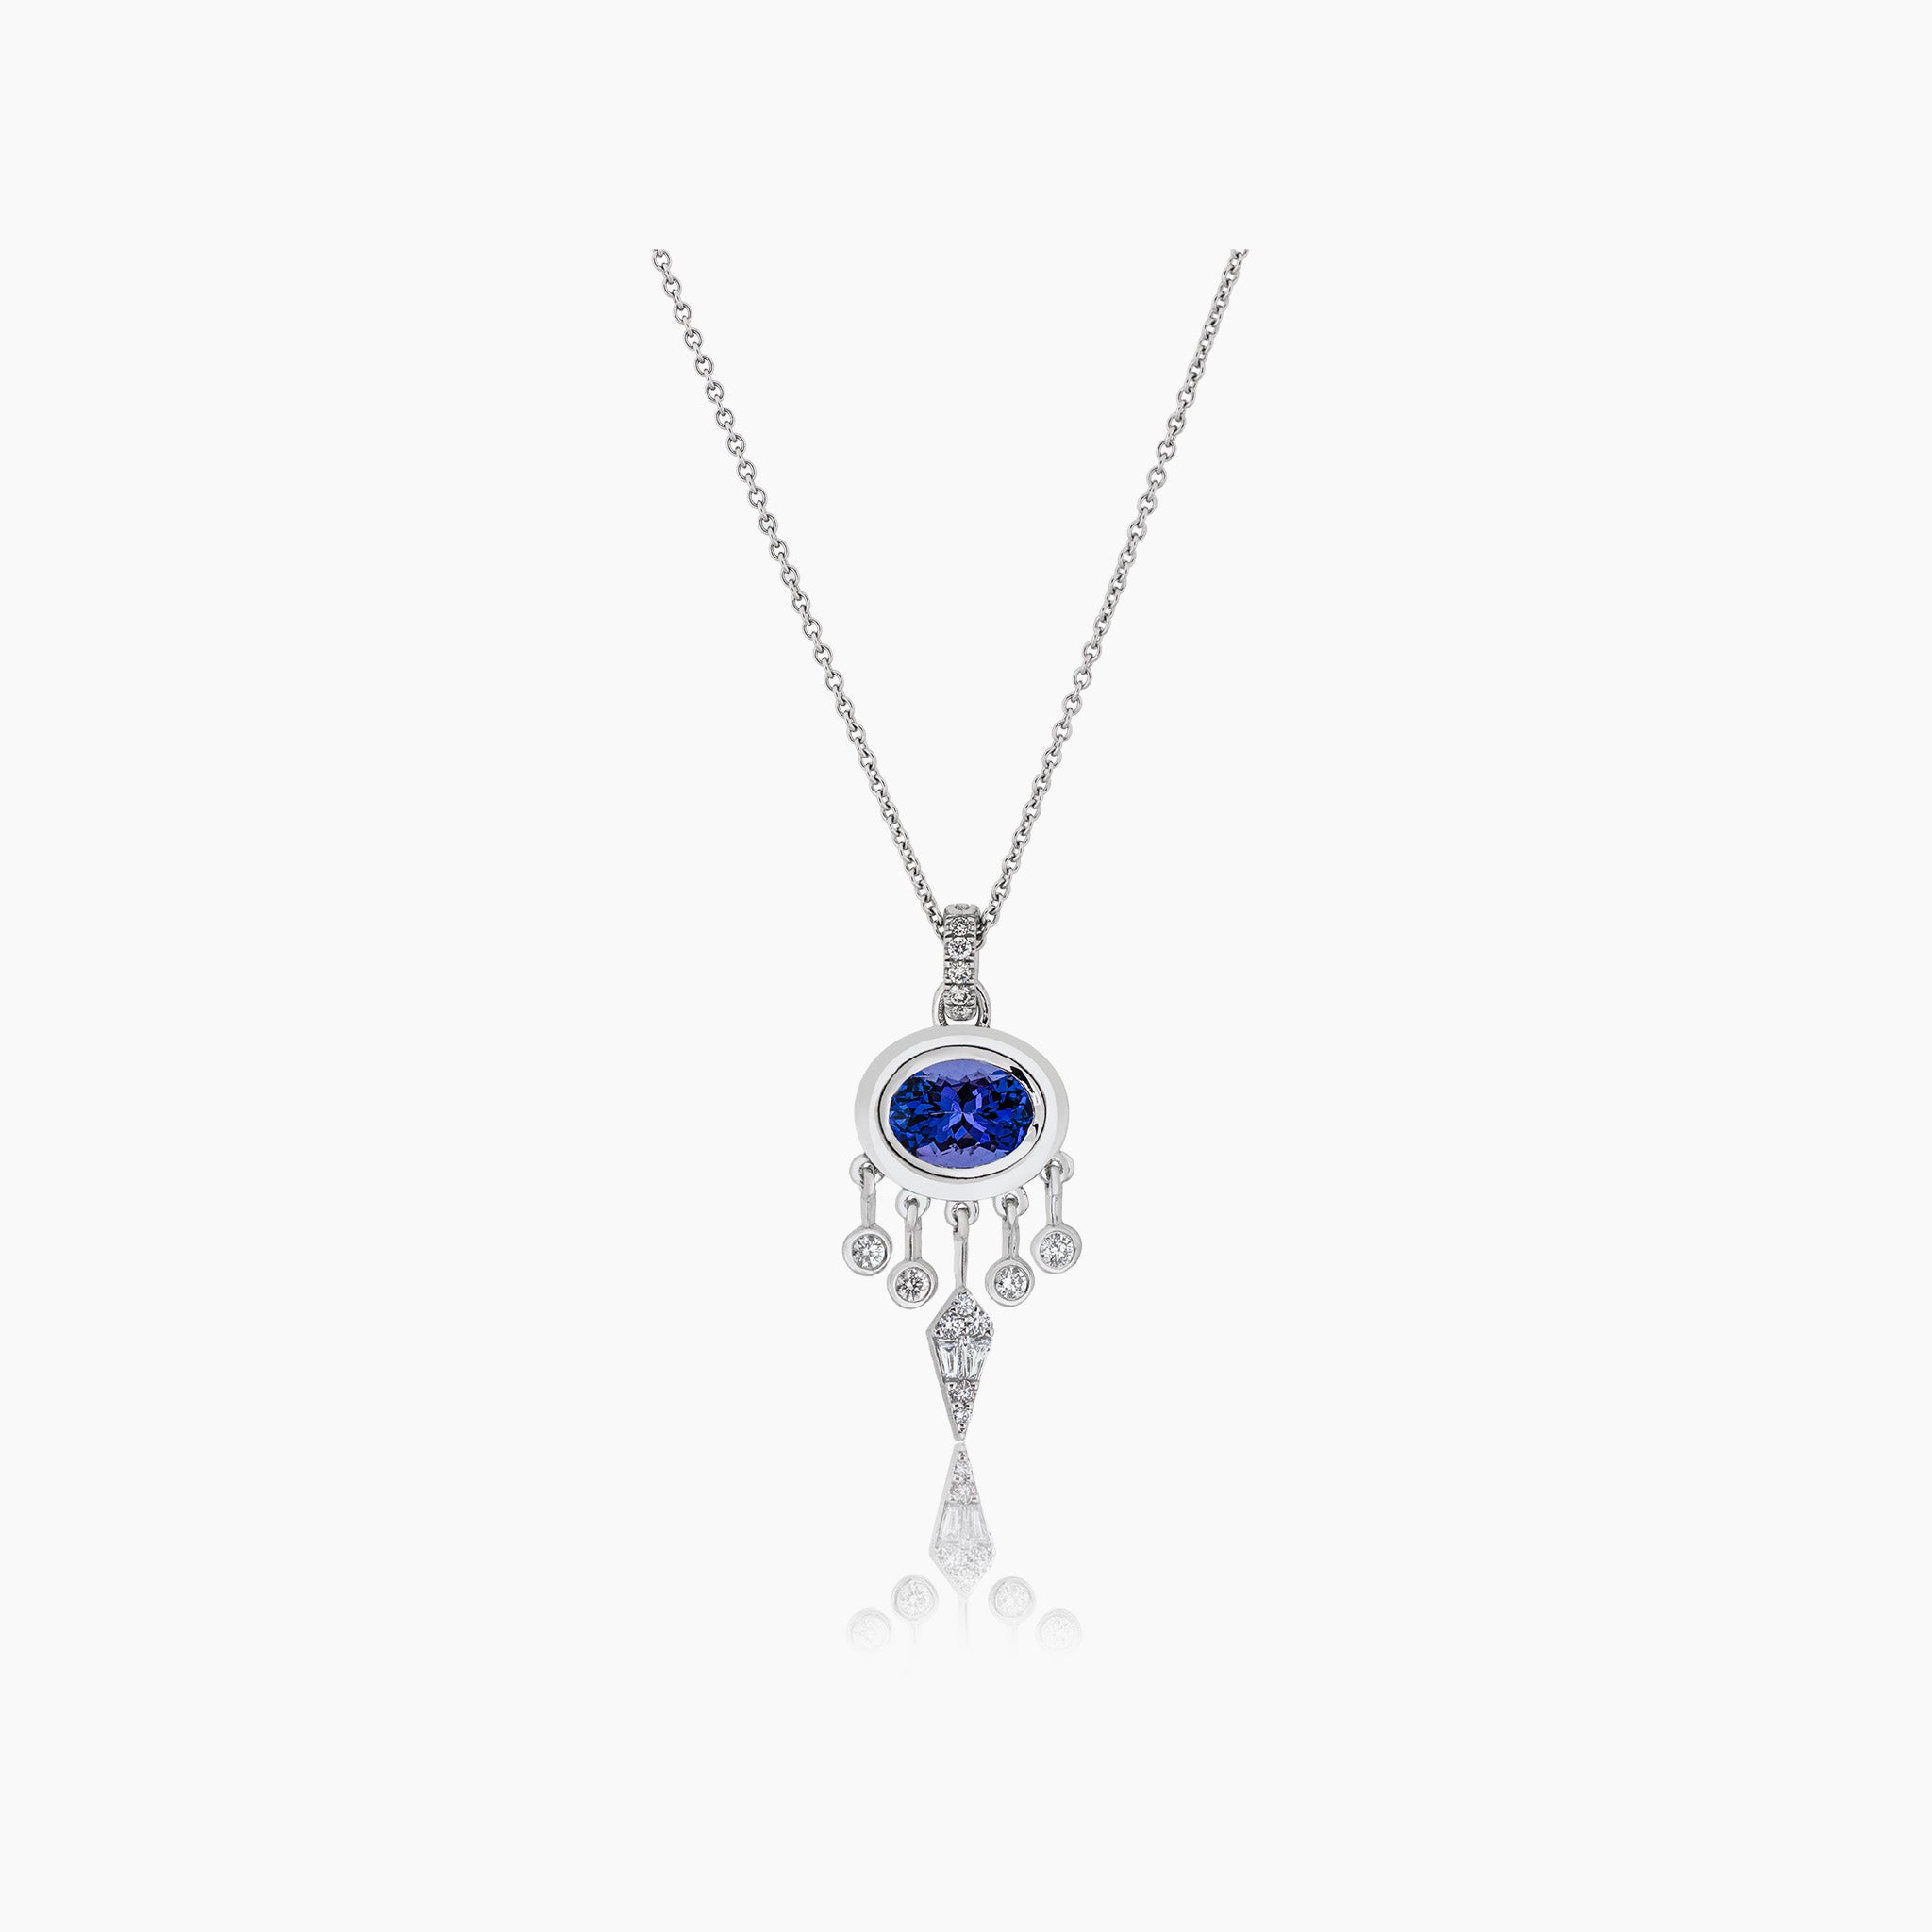 A captivating pendant featuring glistening diamonds and a mesmerizing tanzanite gemstone, showcased against an off-white background.